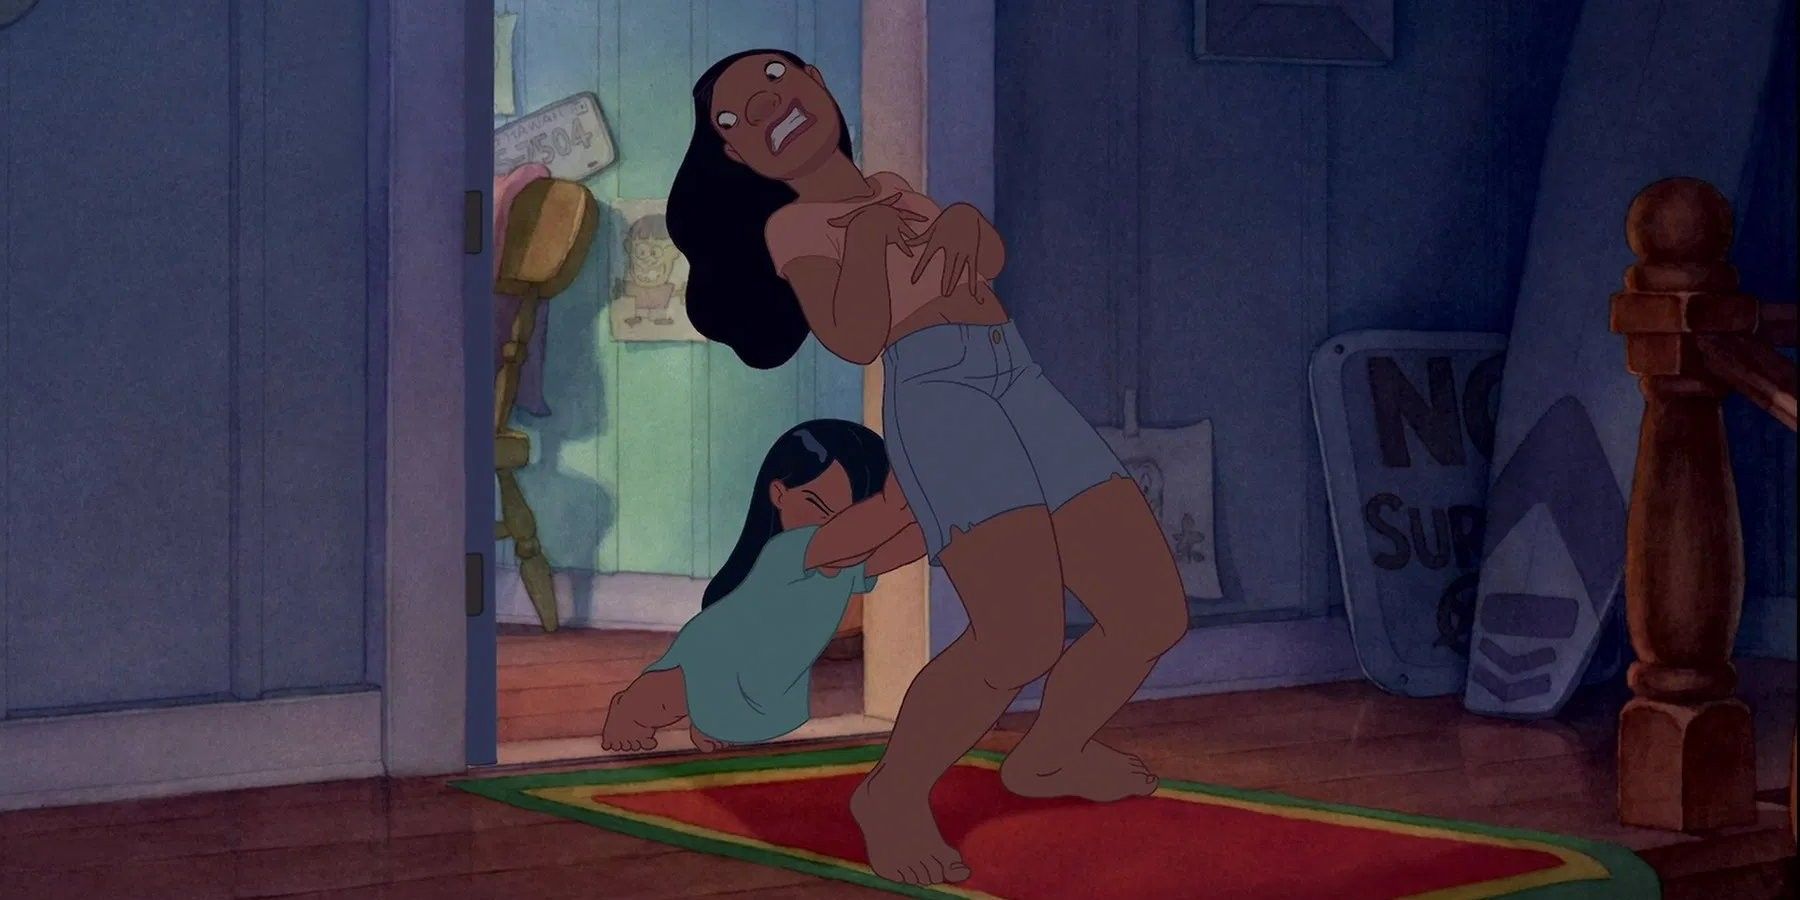 Disney's casting of 'Lilo & Stitch' character prompts colorism debate